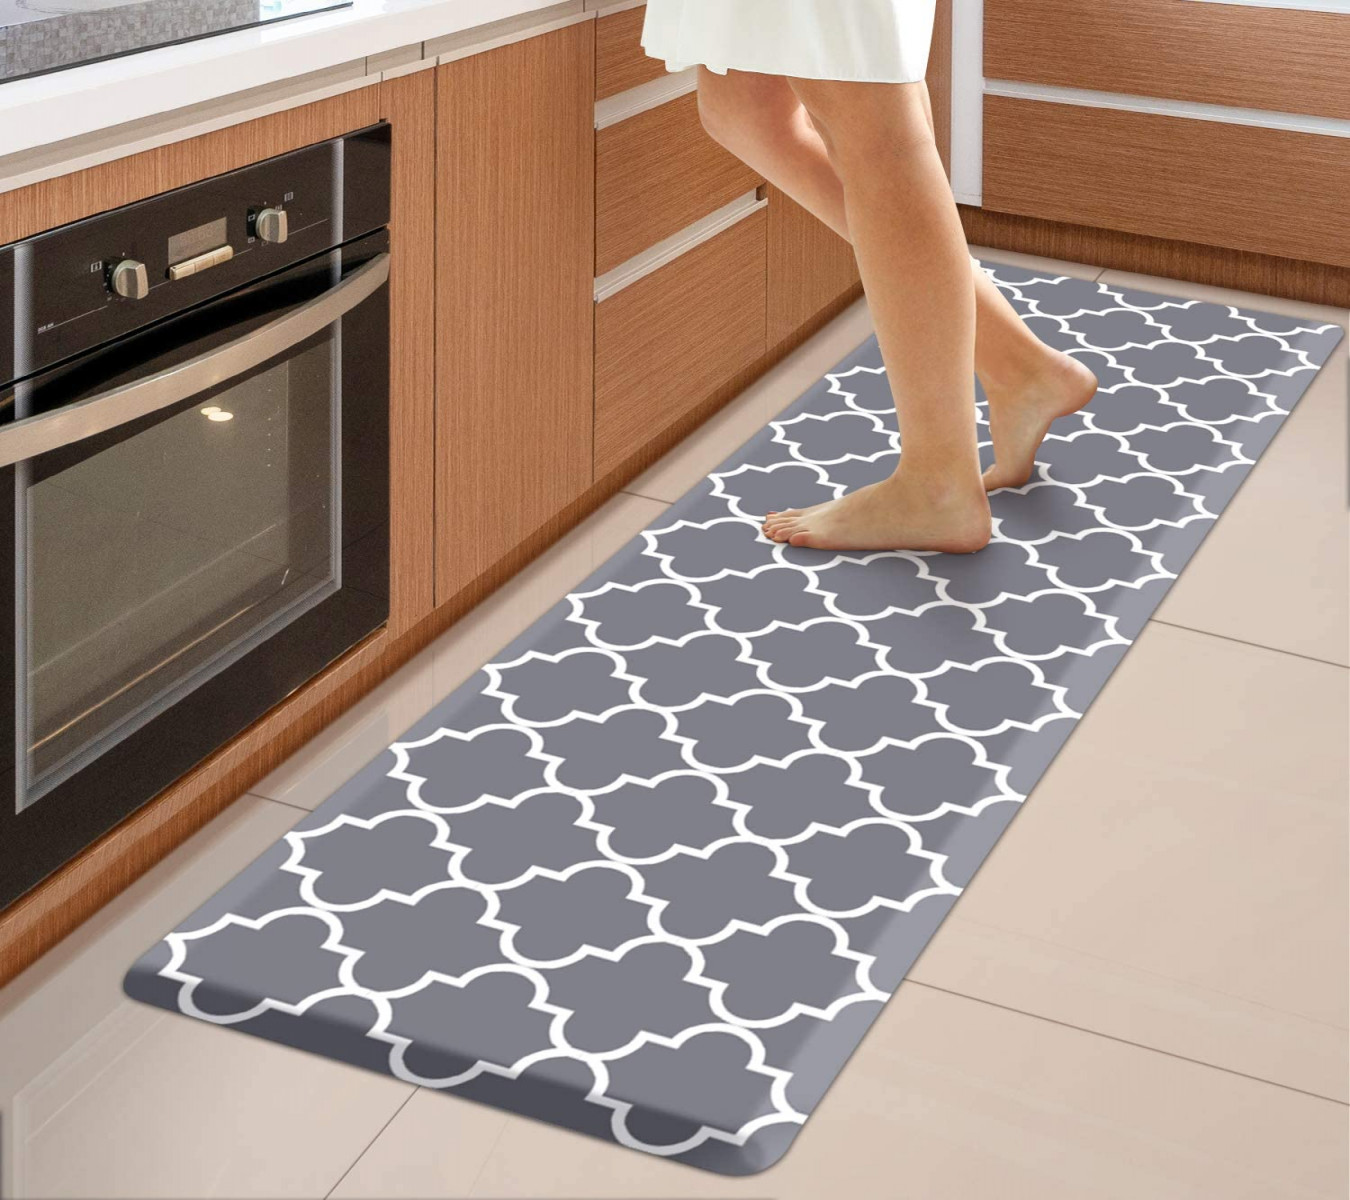 WiseLife Kitchen Mat Padded Anti Fatigue Kitchen Rug Waterproof Non-Slip  Kitchen Mats and Rugs, Heavy Duty PVC Ergonomic Comfortable for Kitchen  Floor